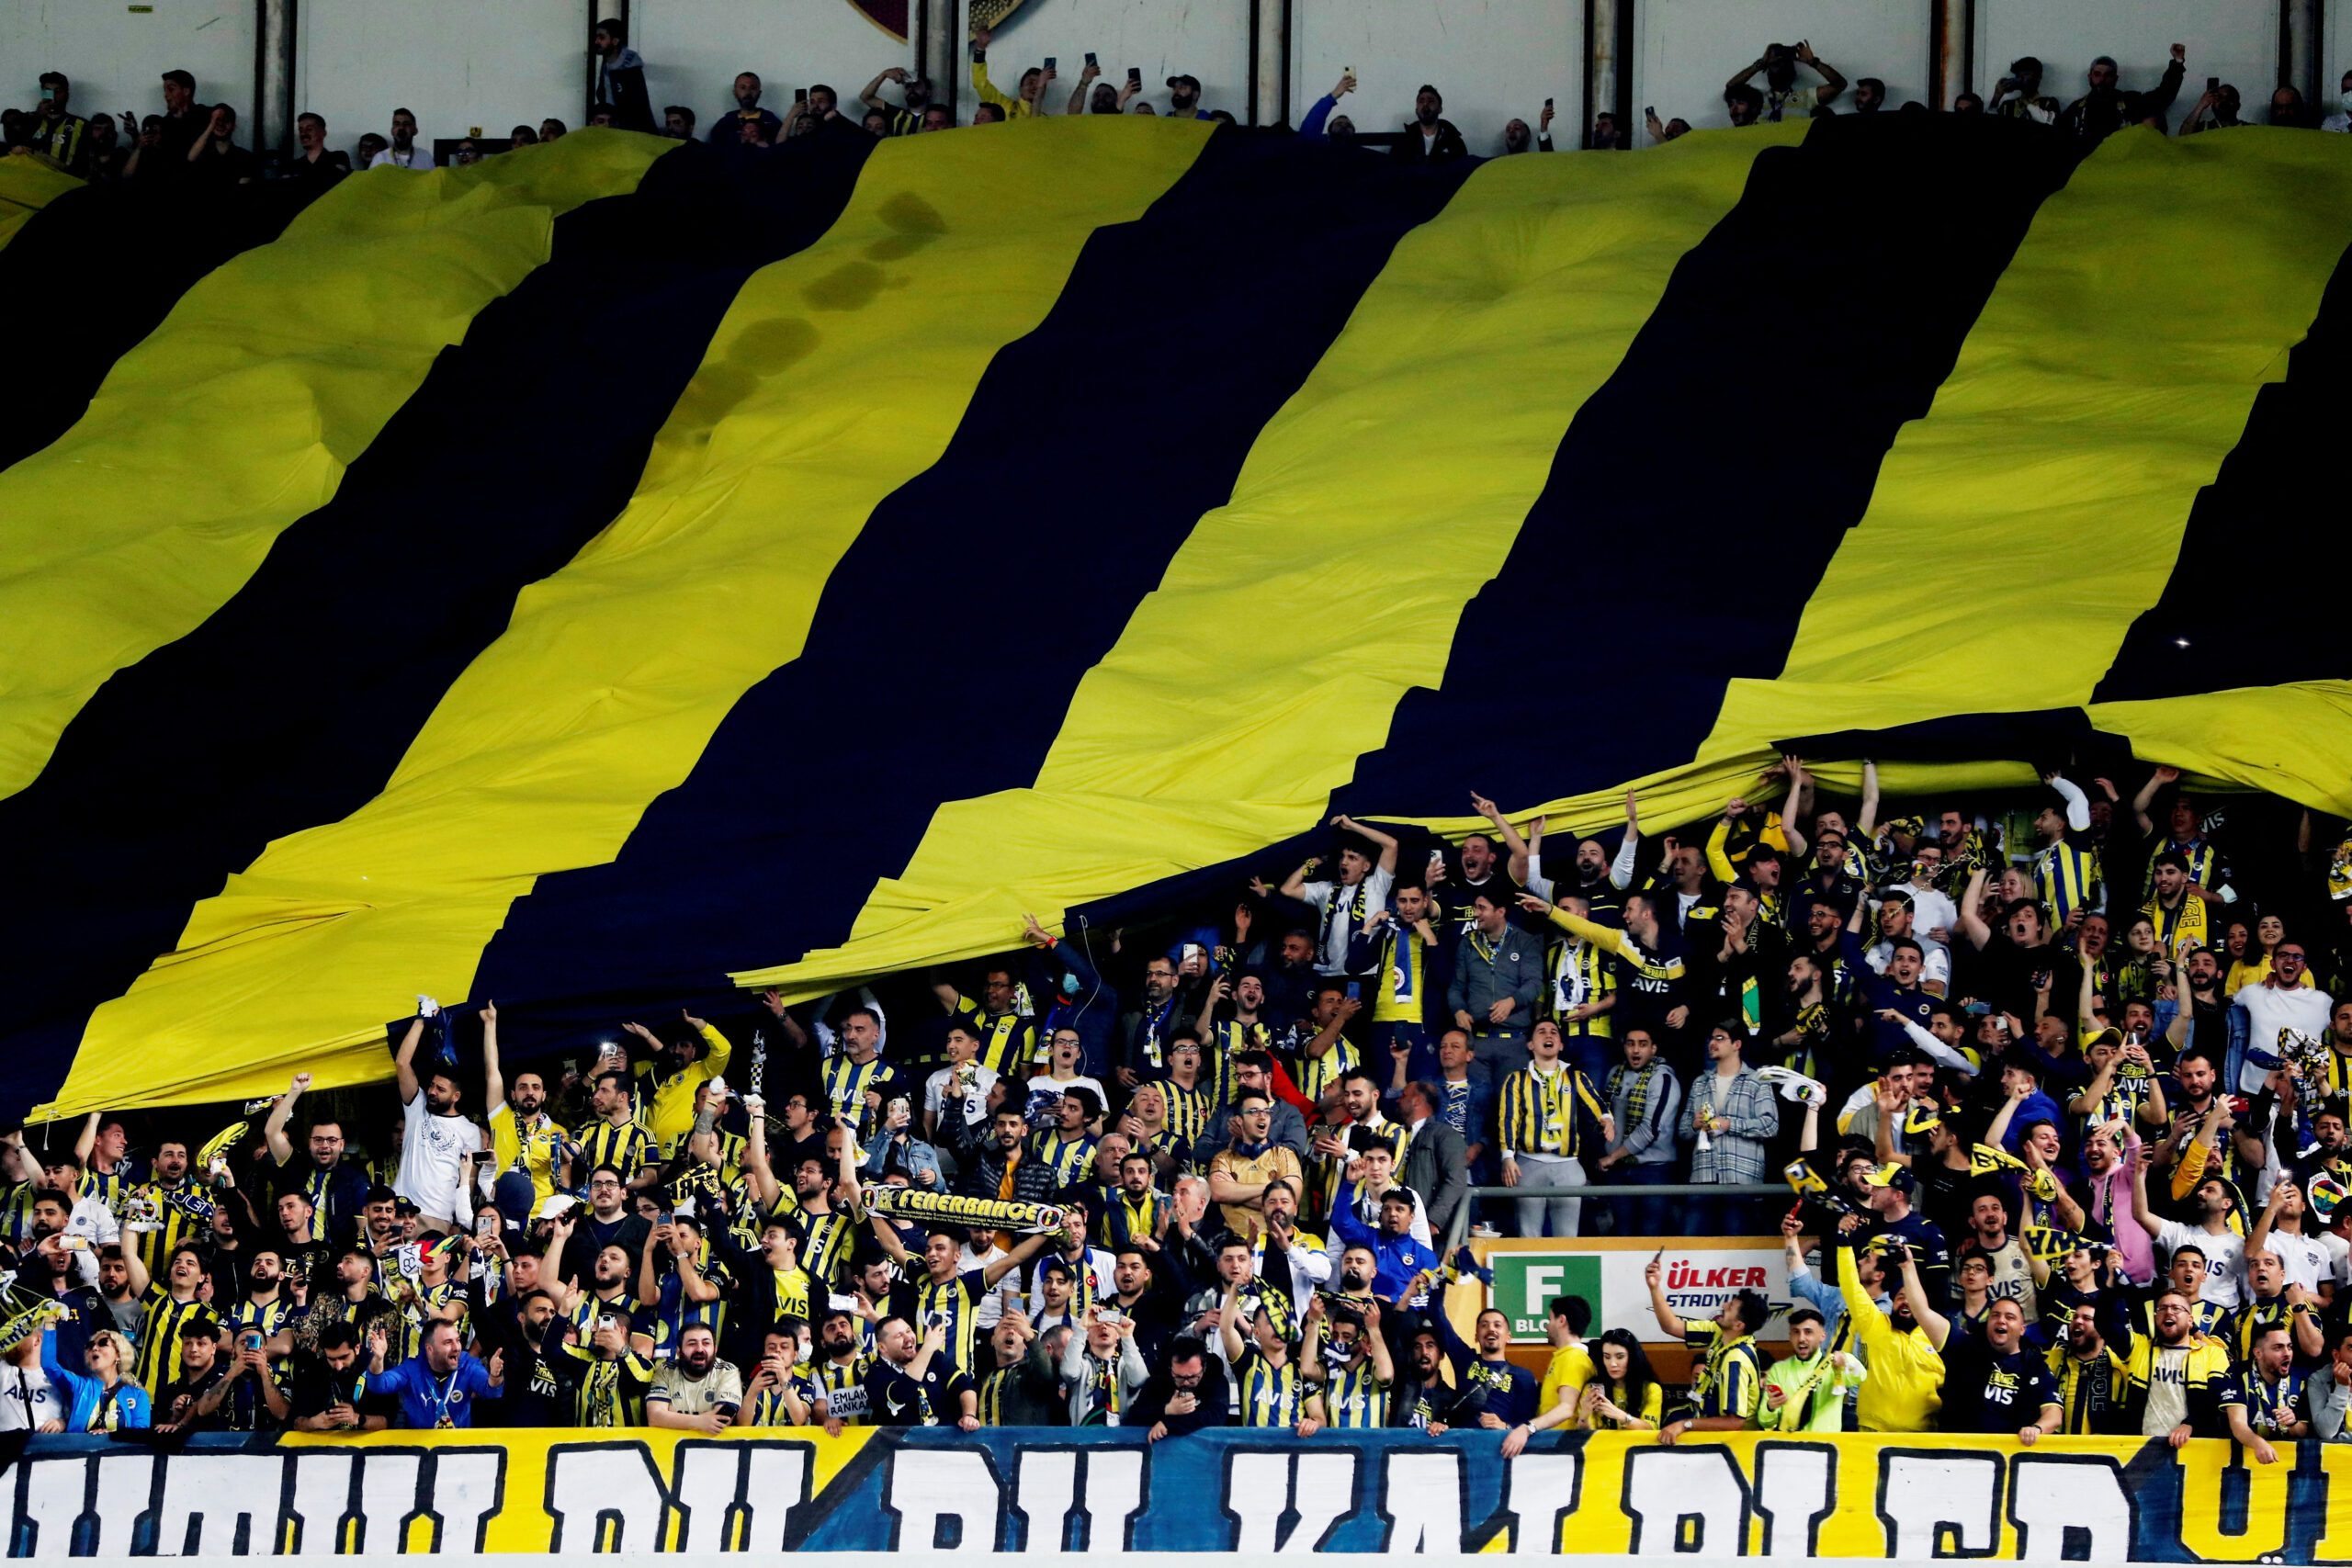 Fenerbahce given partial stadium closure after ‘Putin’ chants for Ukrainian club